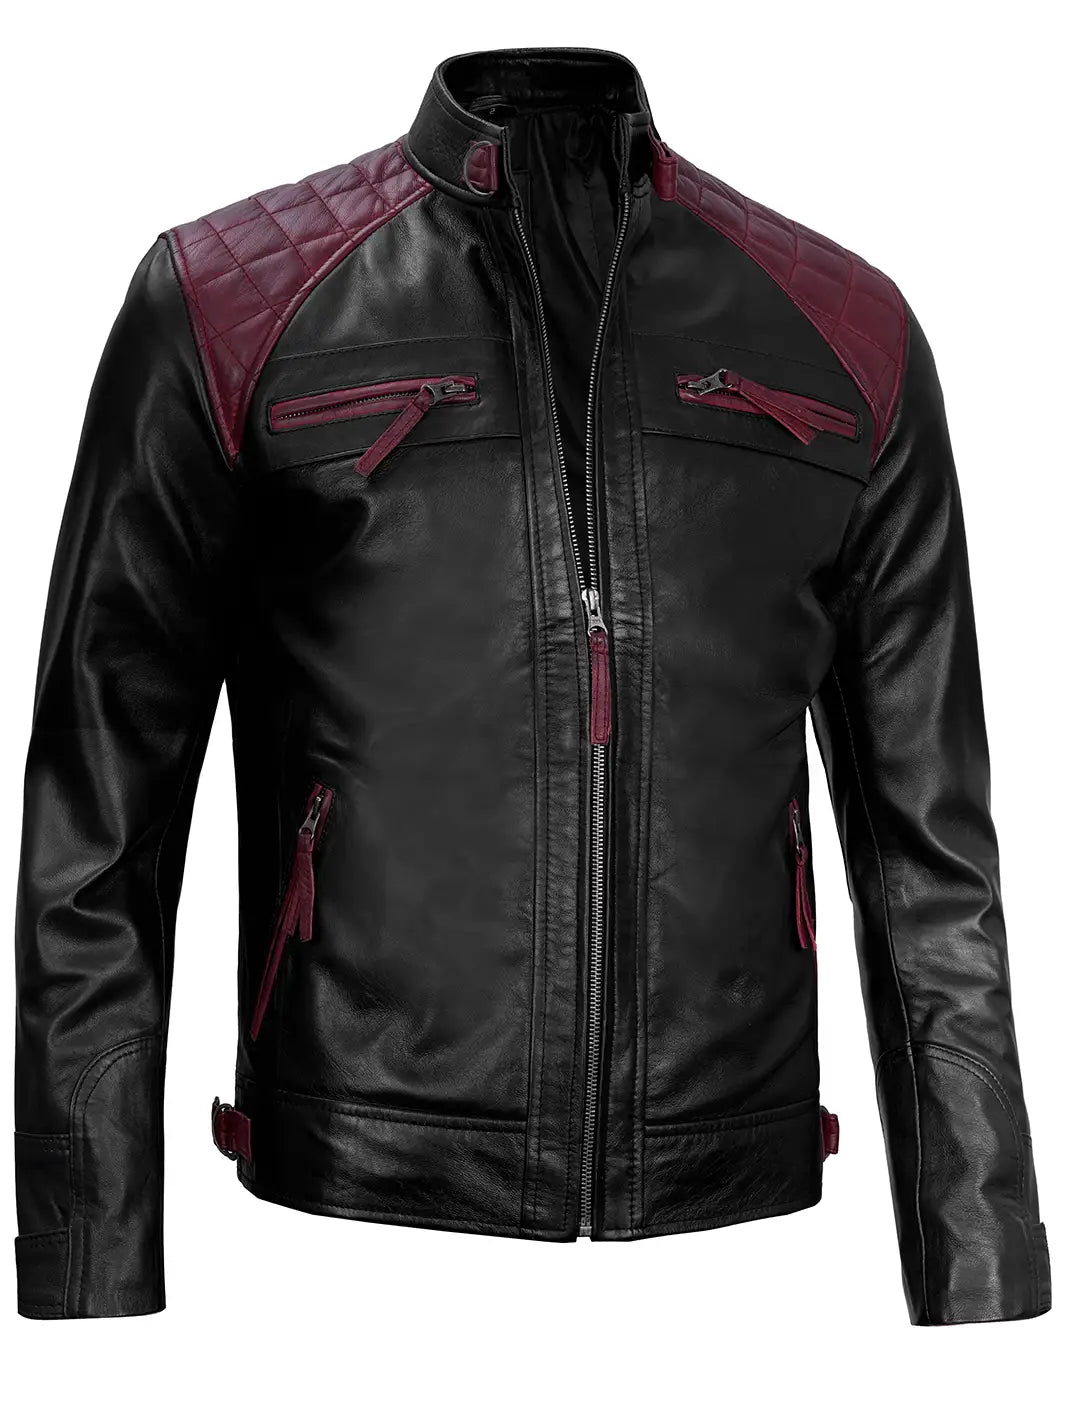 Black and maroon cafe racer leather jacket